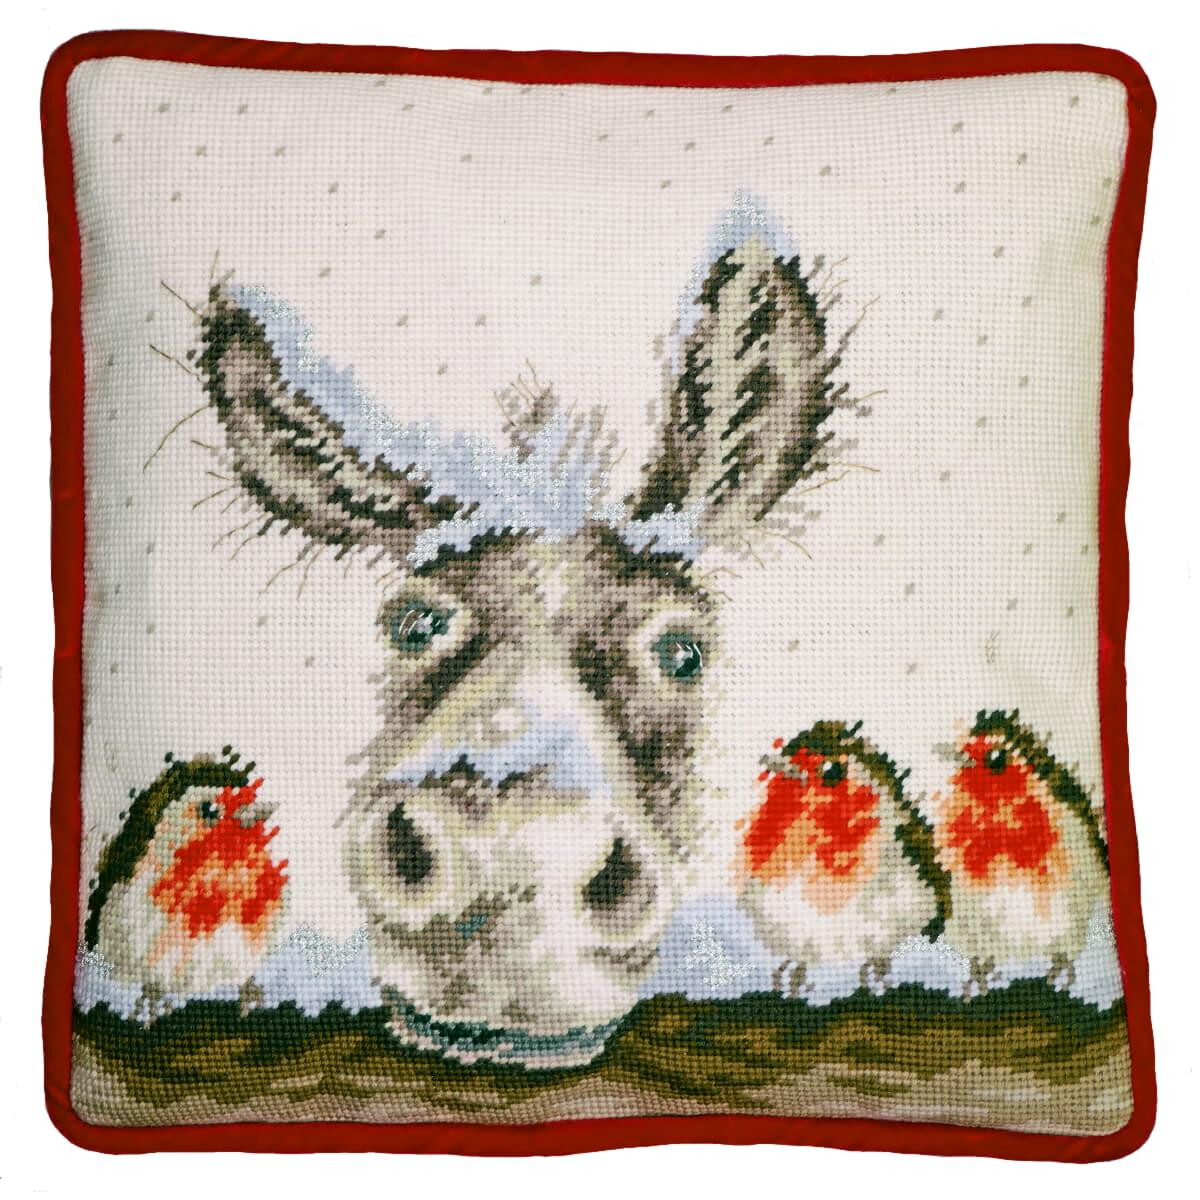 A square cushion with a red border shows a cross-stitch...